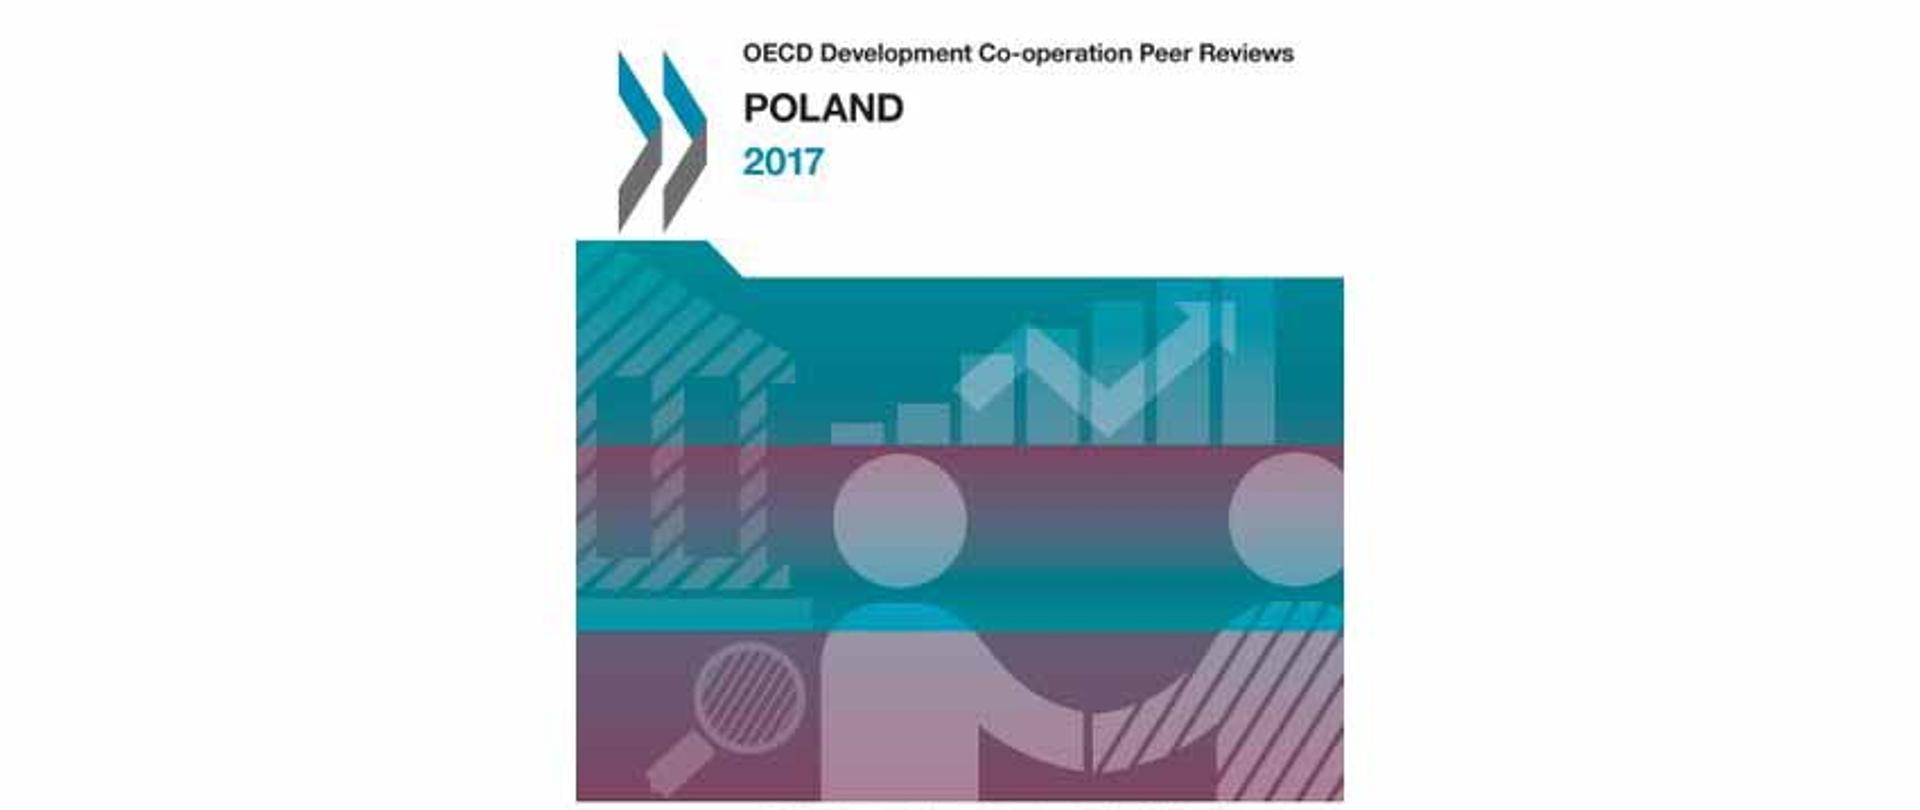 title OECD Development Co-operation Peer Reviews: Poland 2017 with shape of two people shaking hands